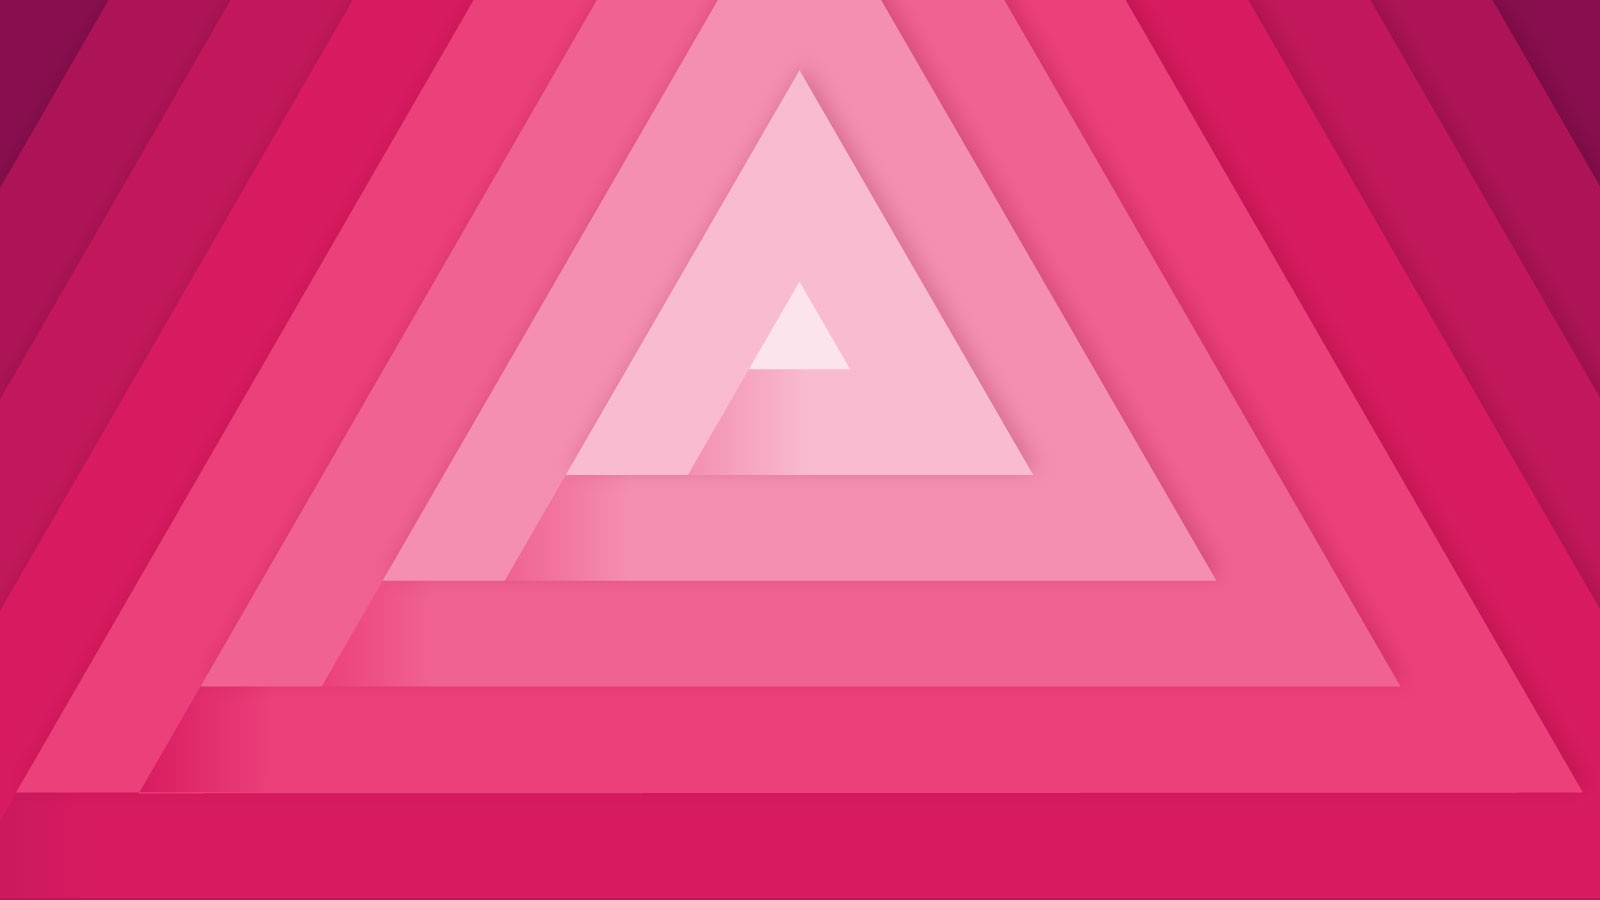 General 1600x900 material style triangle abstract digital art gradient red